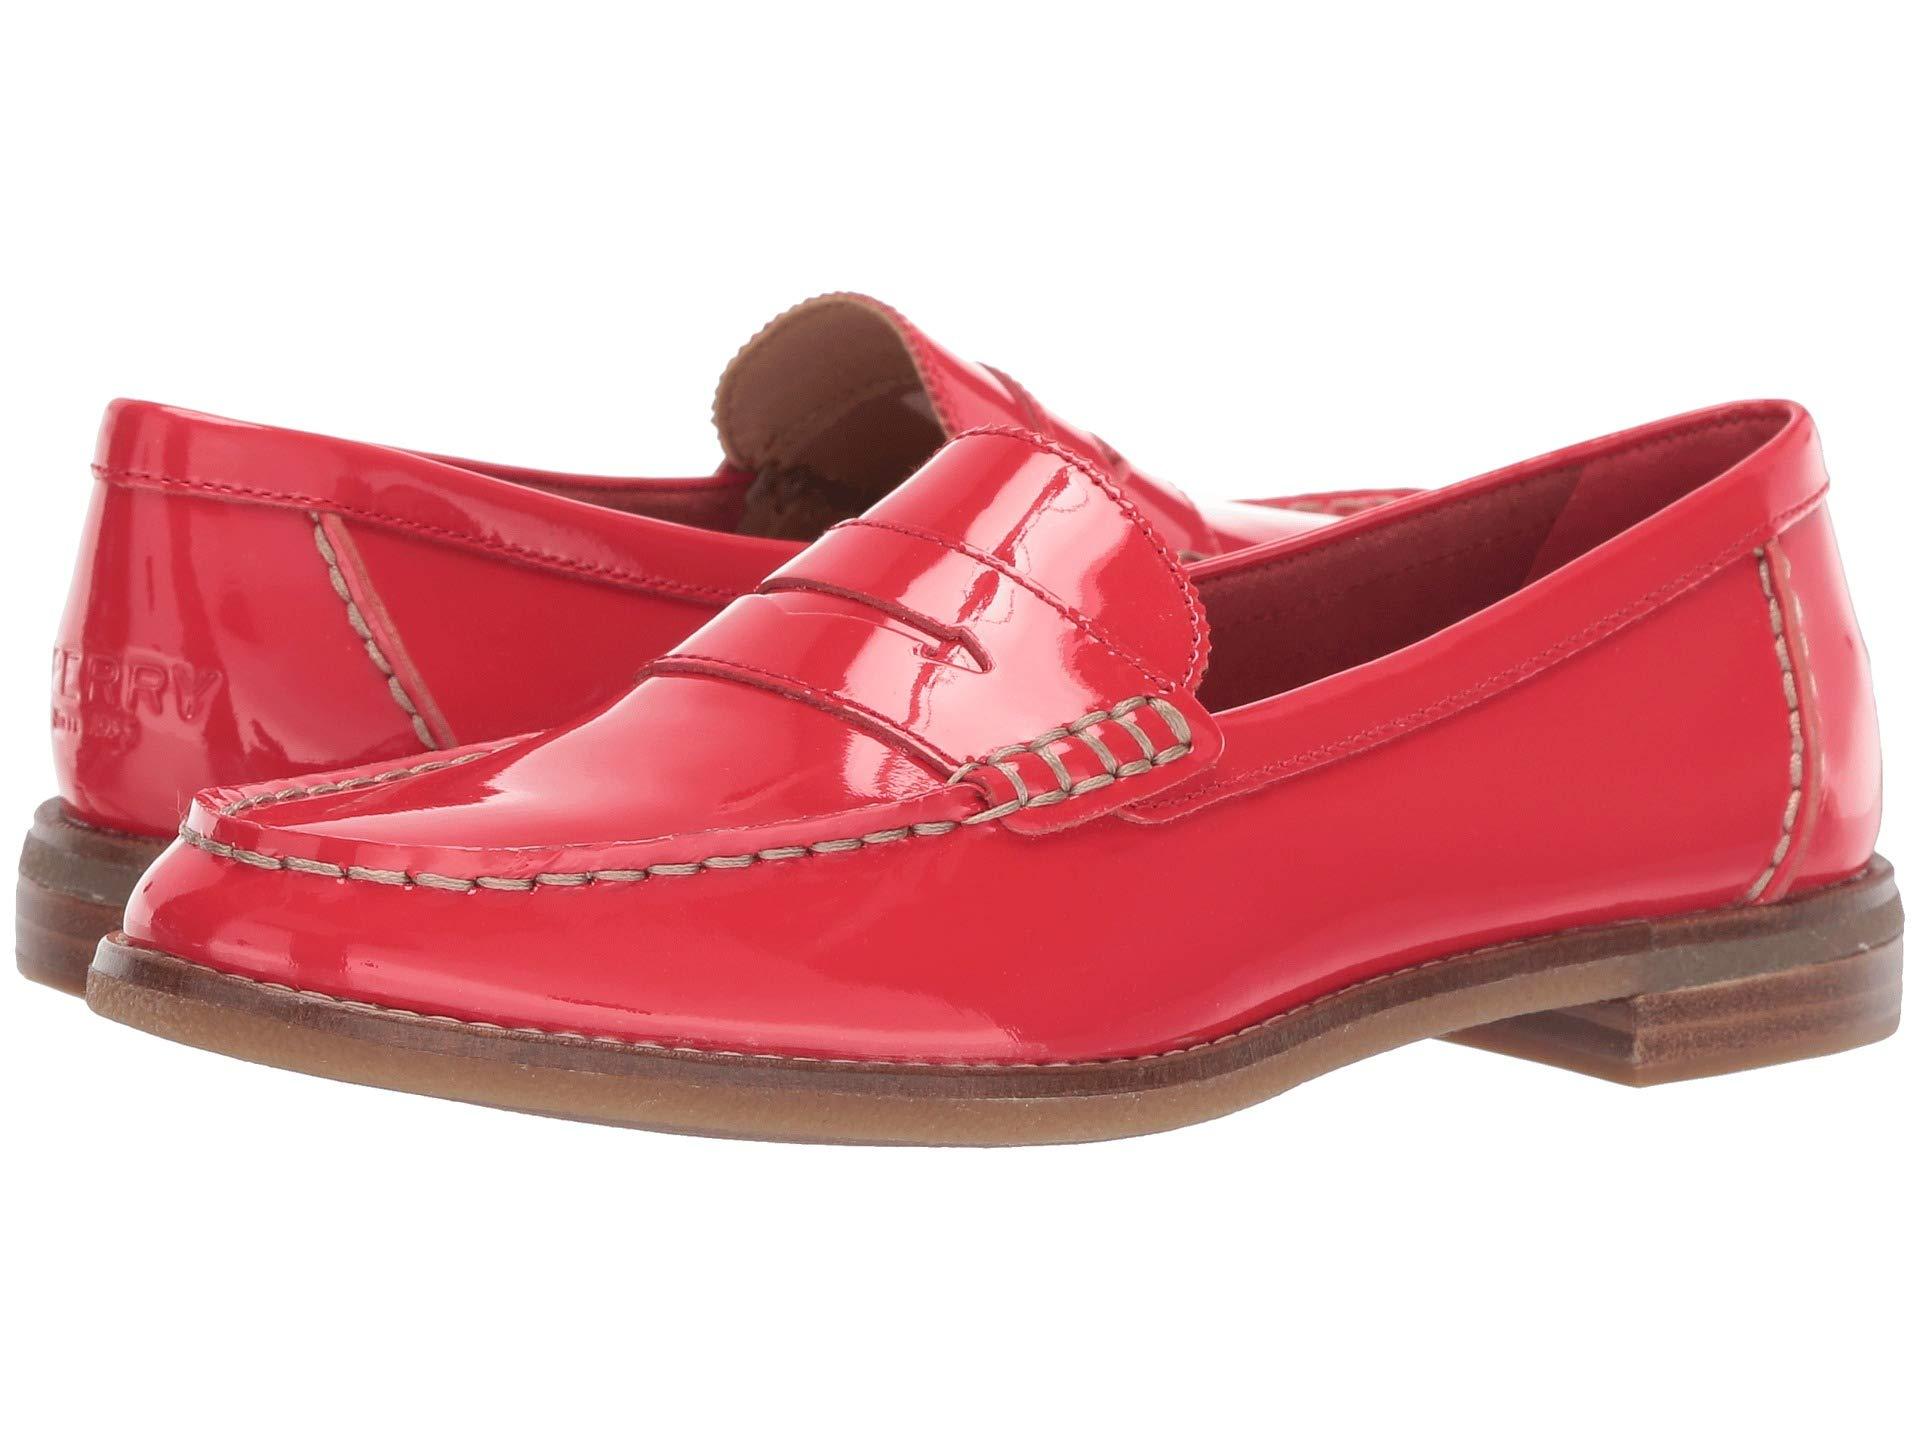 Lyst - Sperry Top-Sider Seaport Patent Penny Loafer (red) Women's Shoes ...